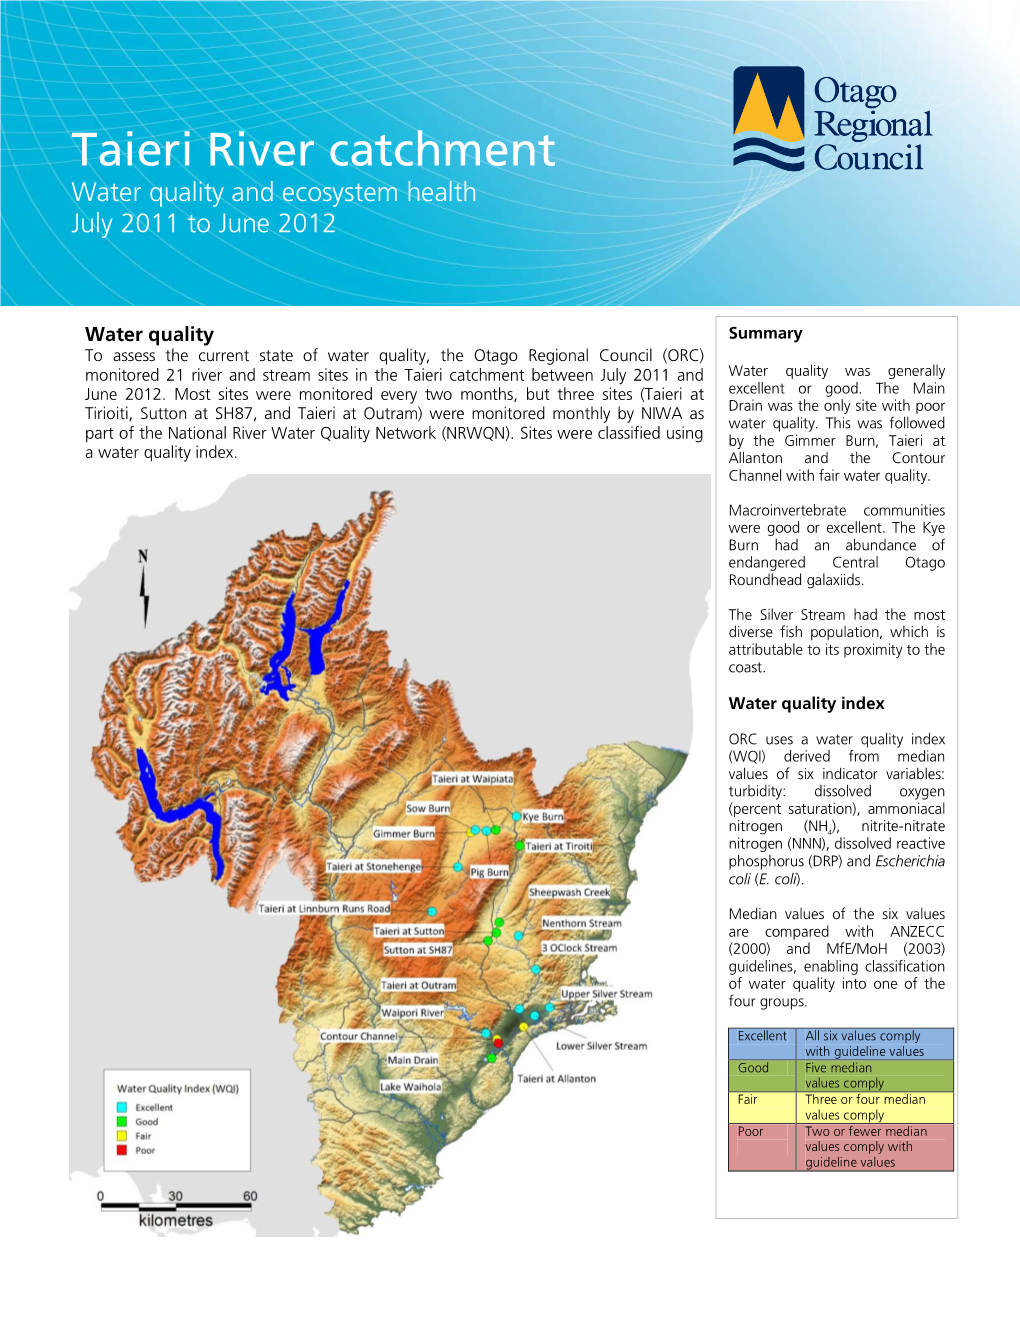 Taieri River Catchment Water Quality and Ecosystem Health July 2011 to June 2012